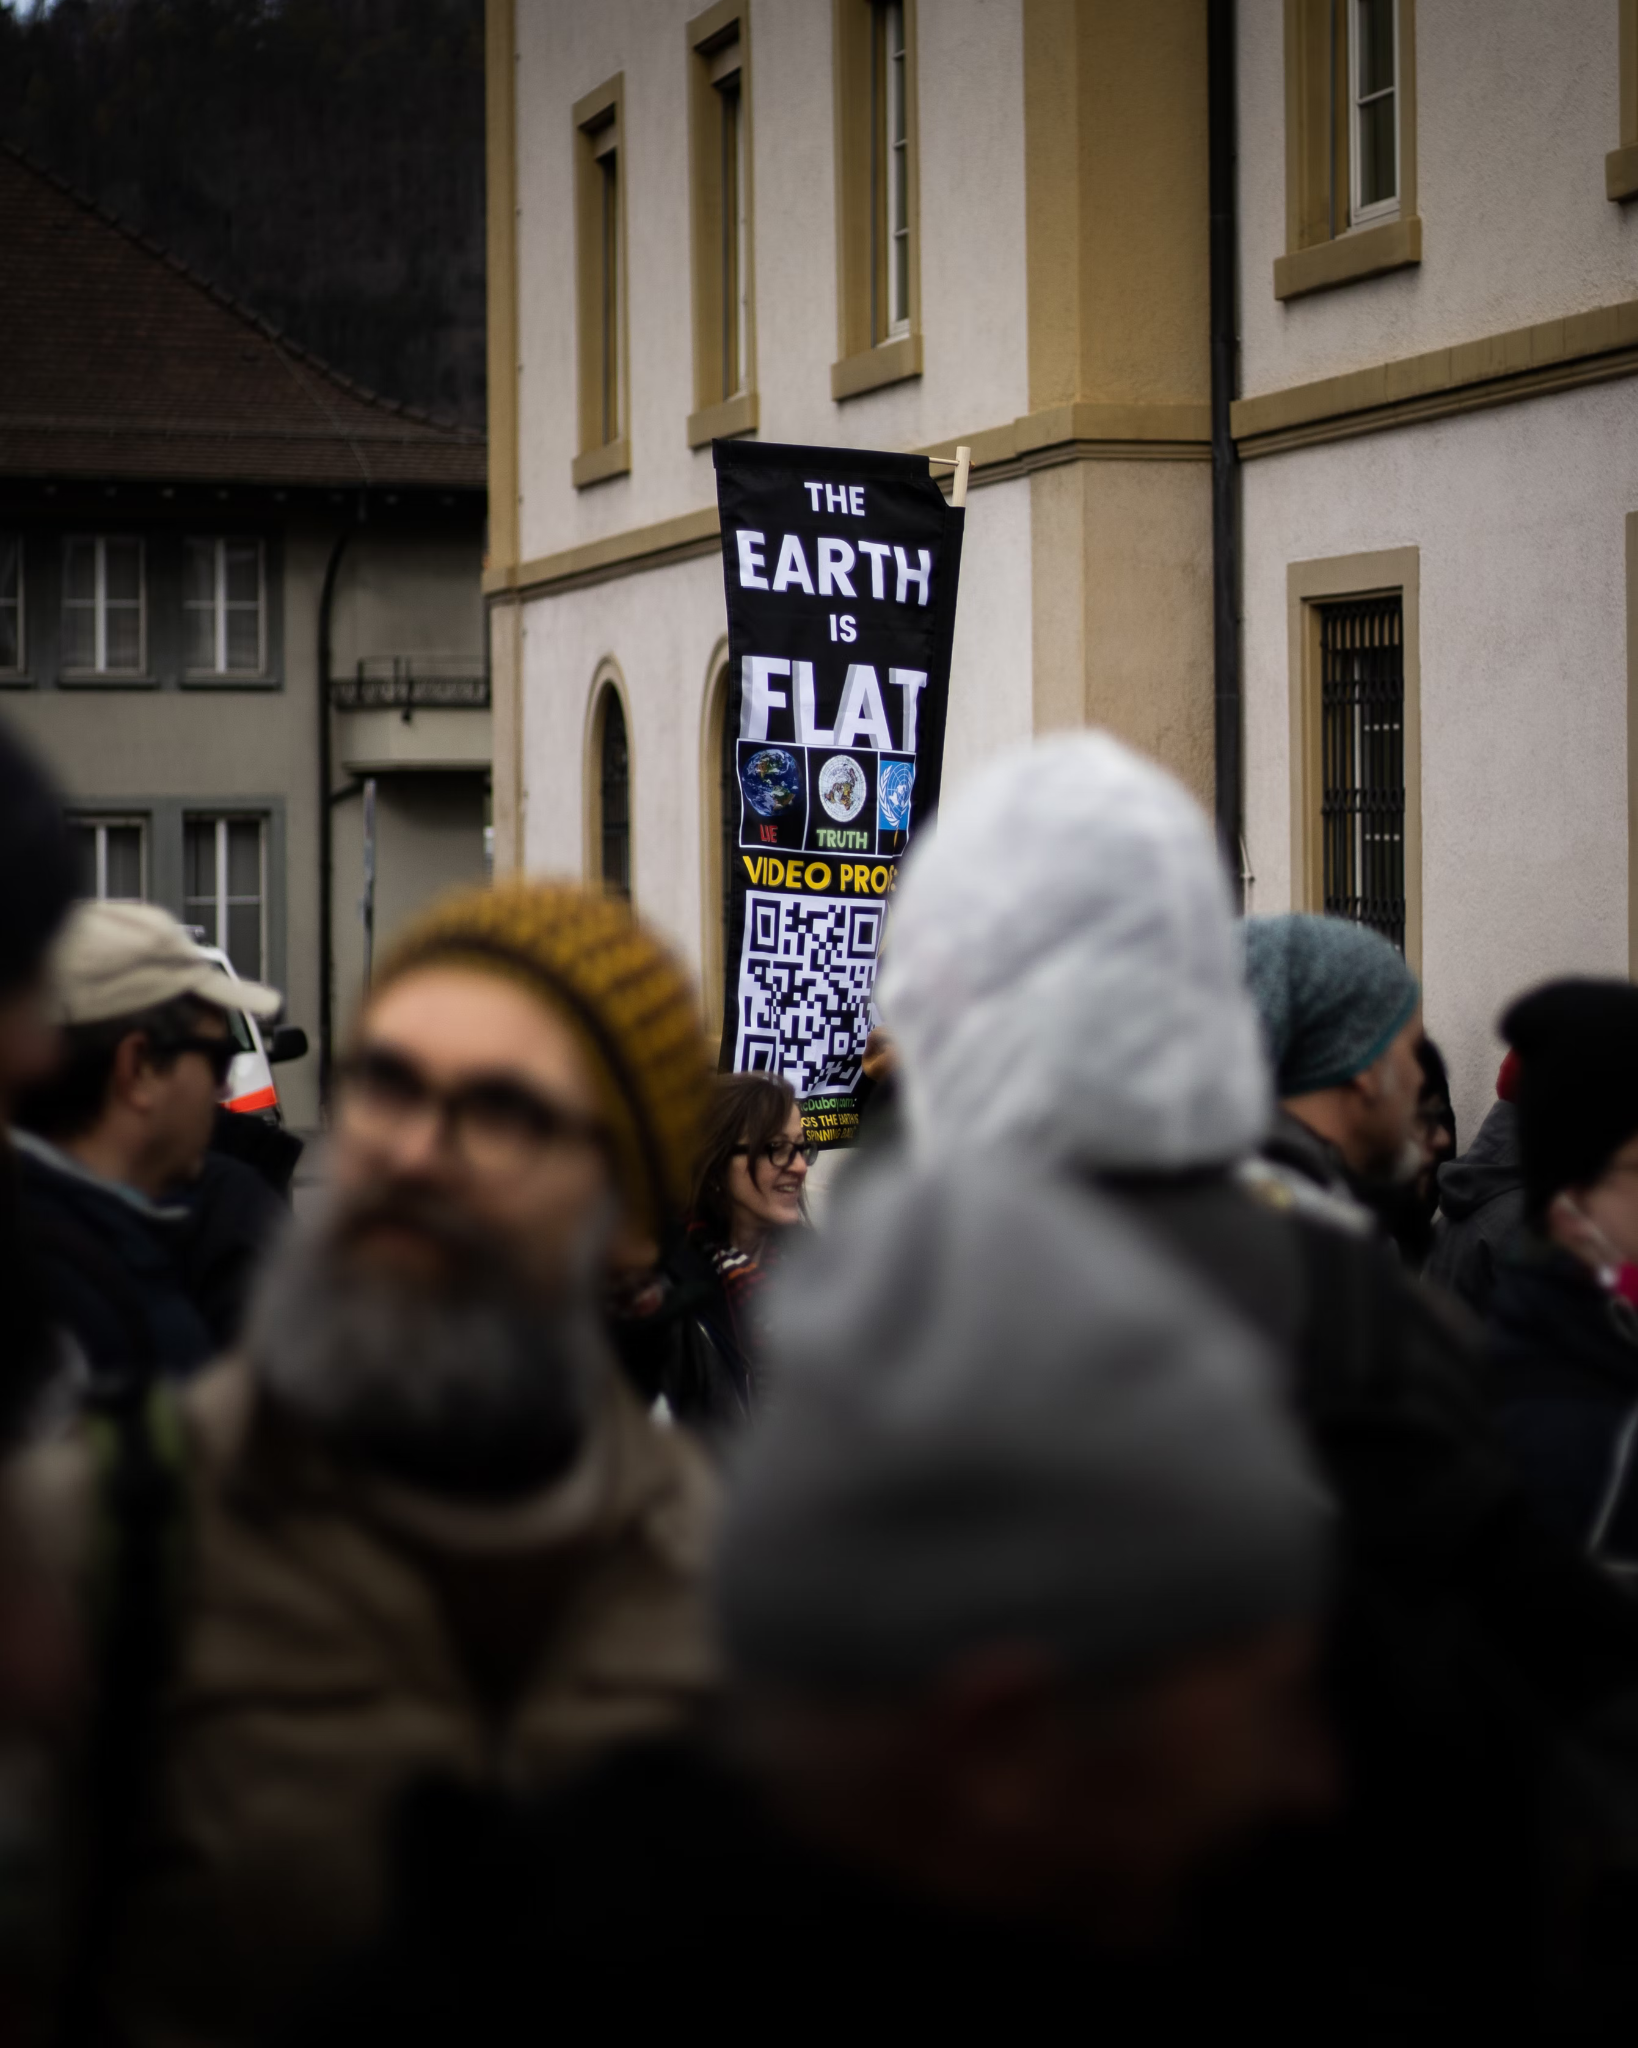 “The Earth is Flat” sign at a 2021 protest in Liestal, Switzerland, against pandemic measures